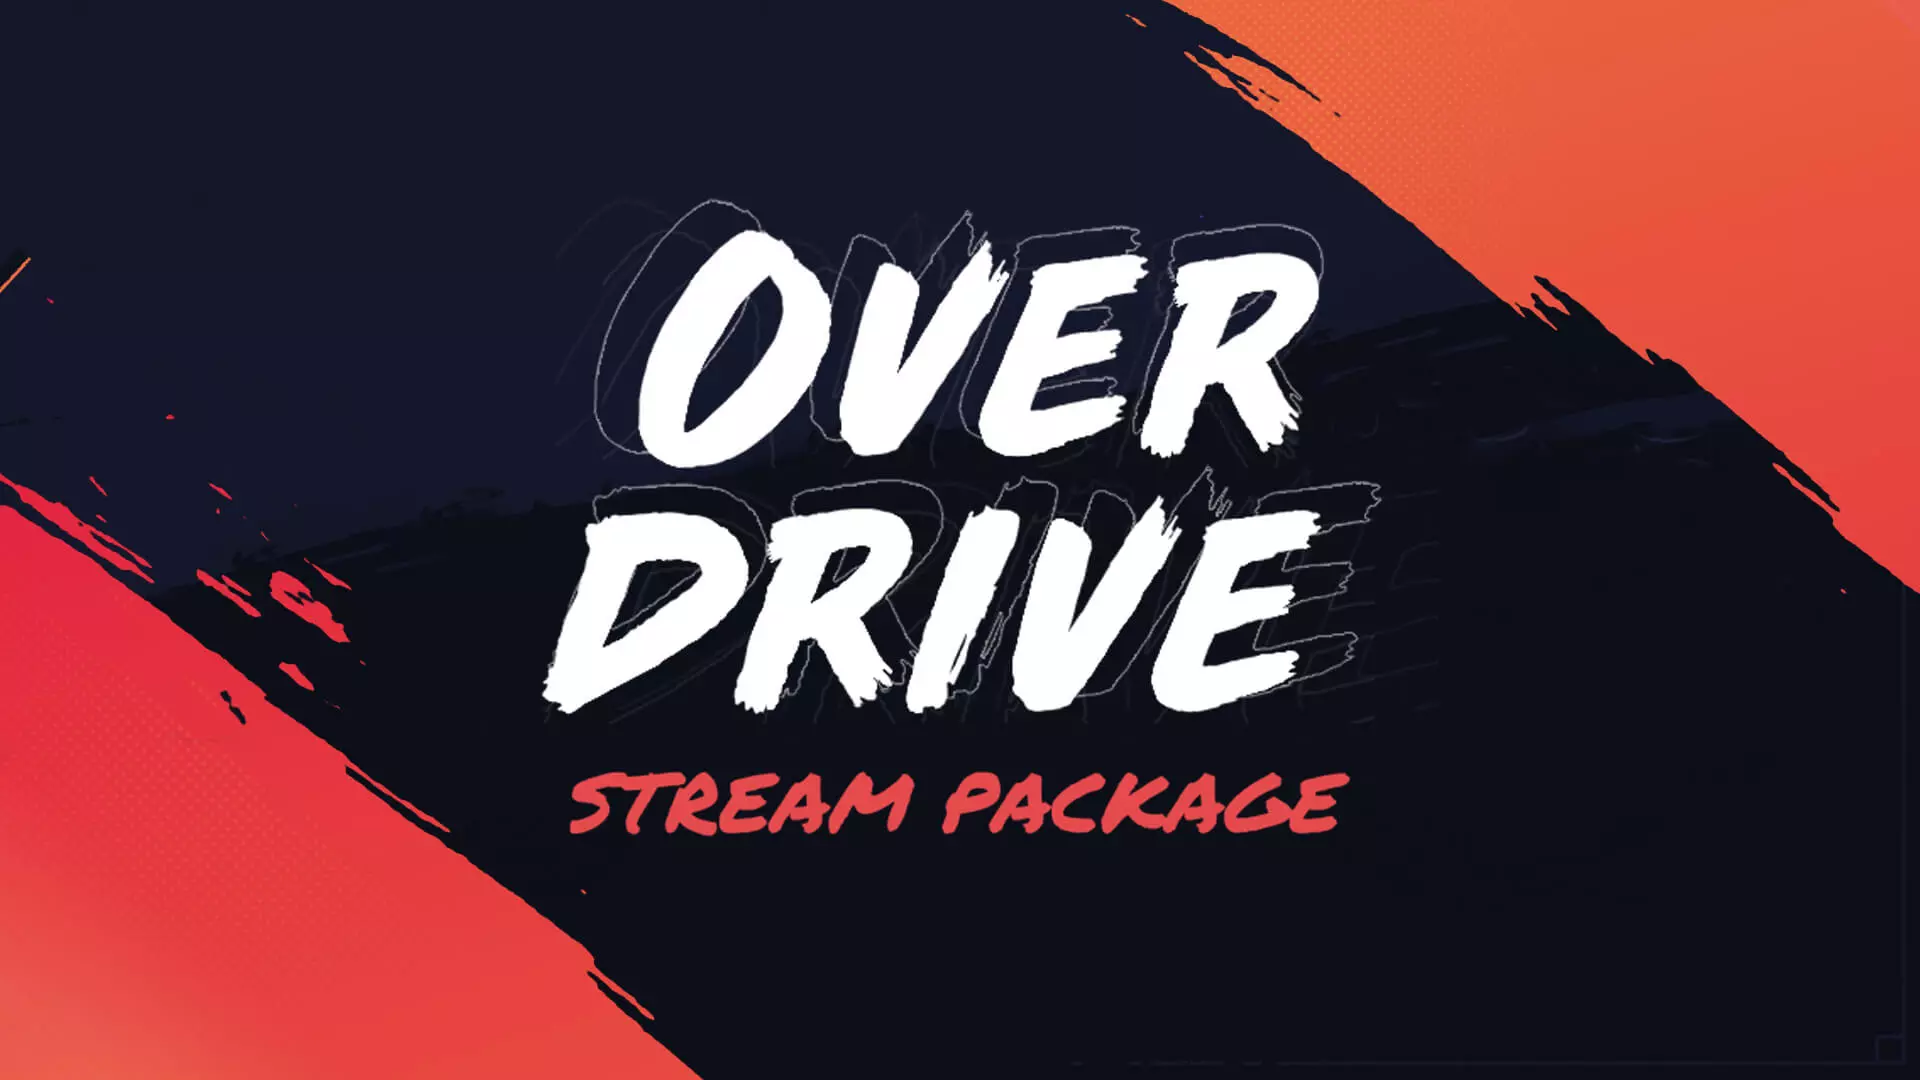 Overdrive - Stream Package - Main Image